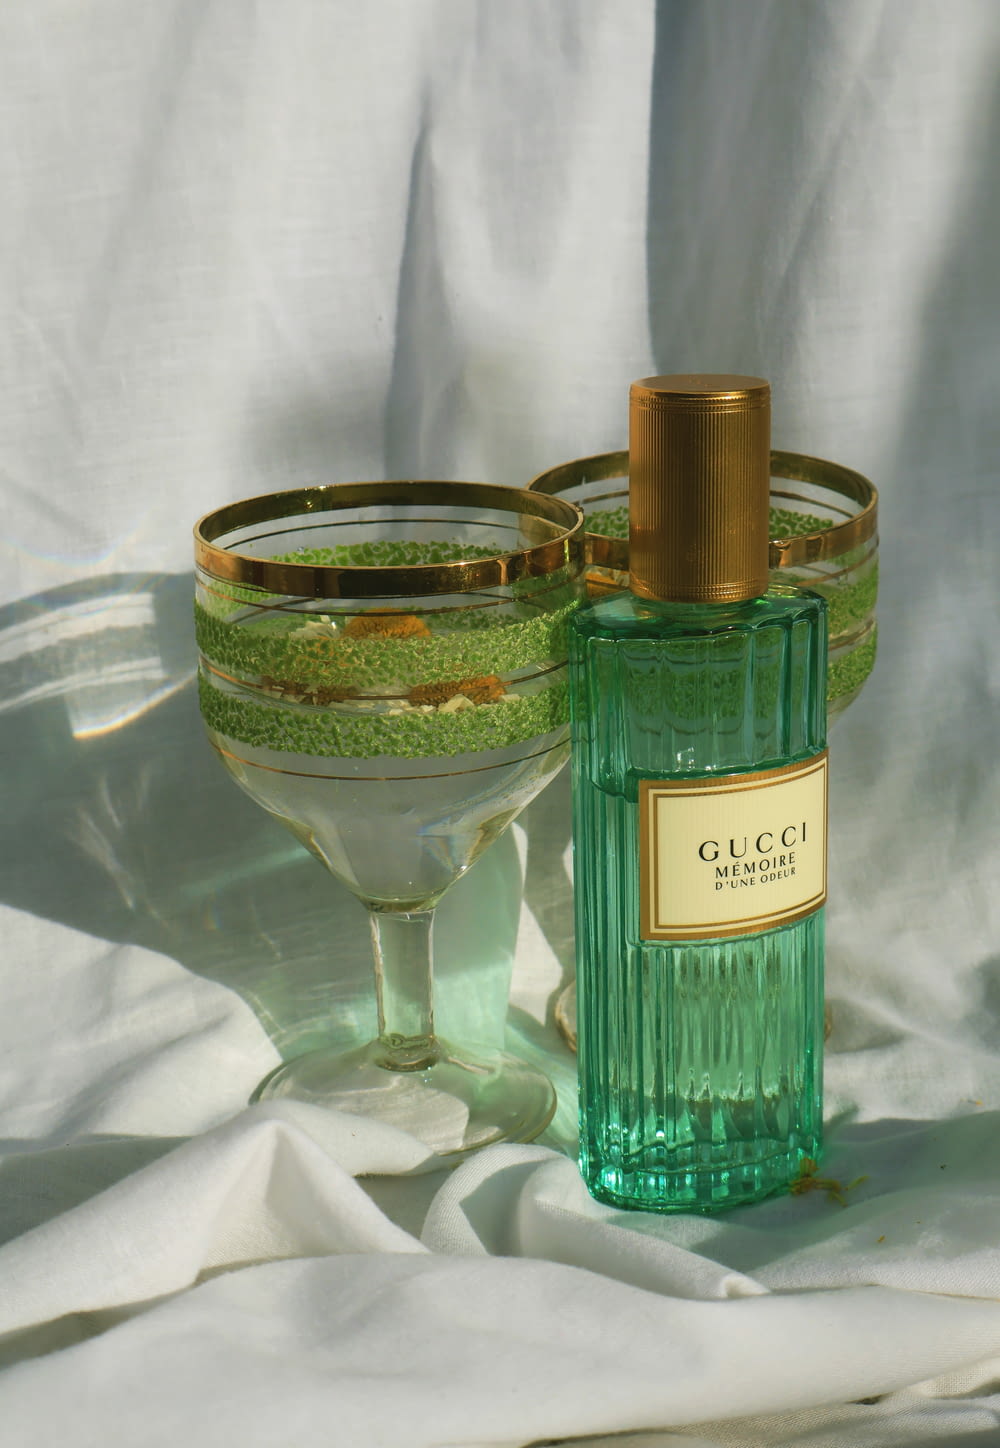 a bottle of perfume sitting next to a glass bowl